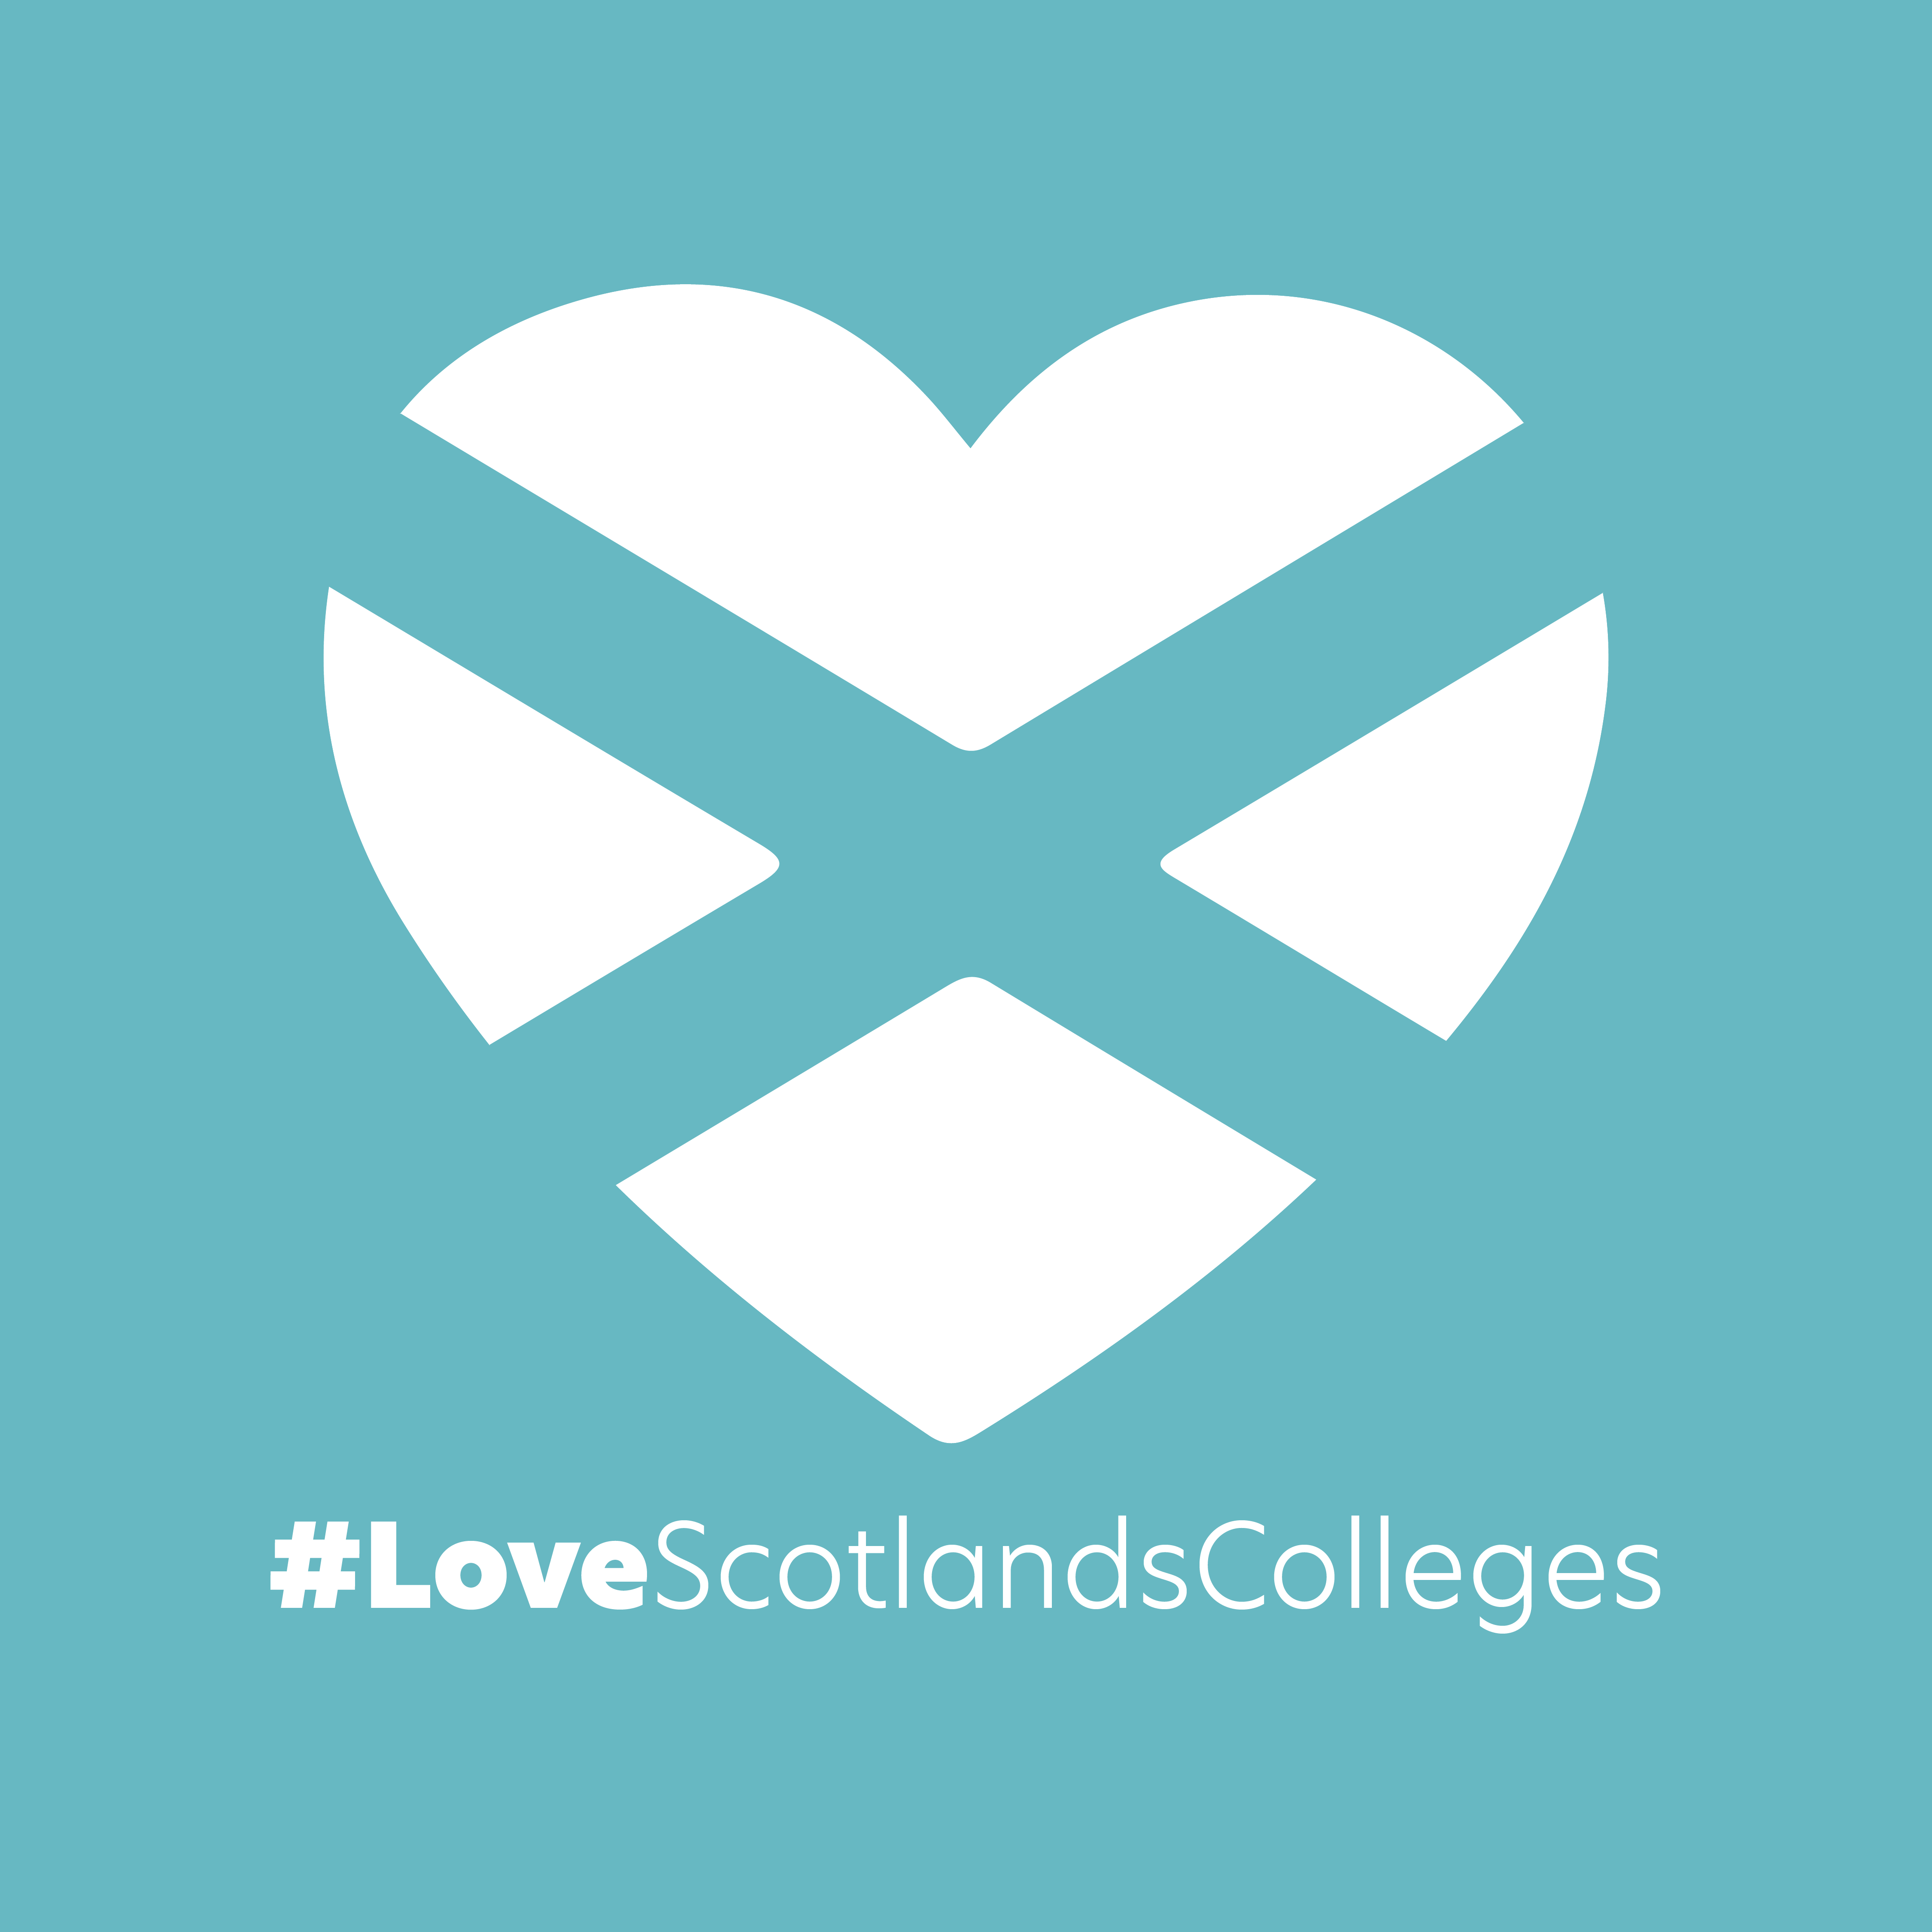 National launch of the #LoveScotlandsColleges campaign